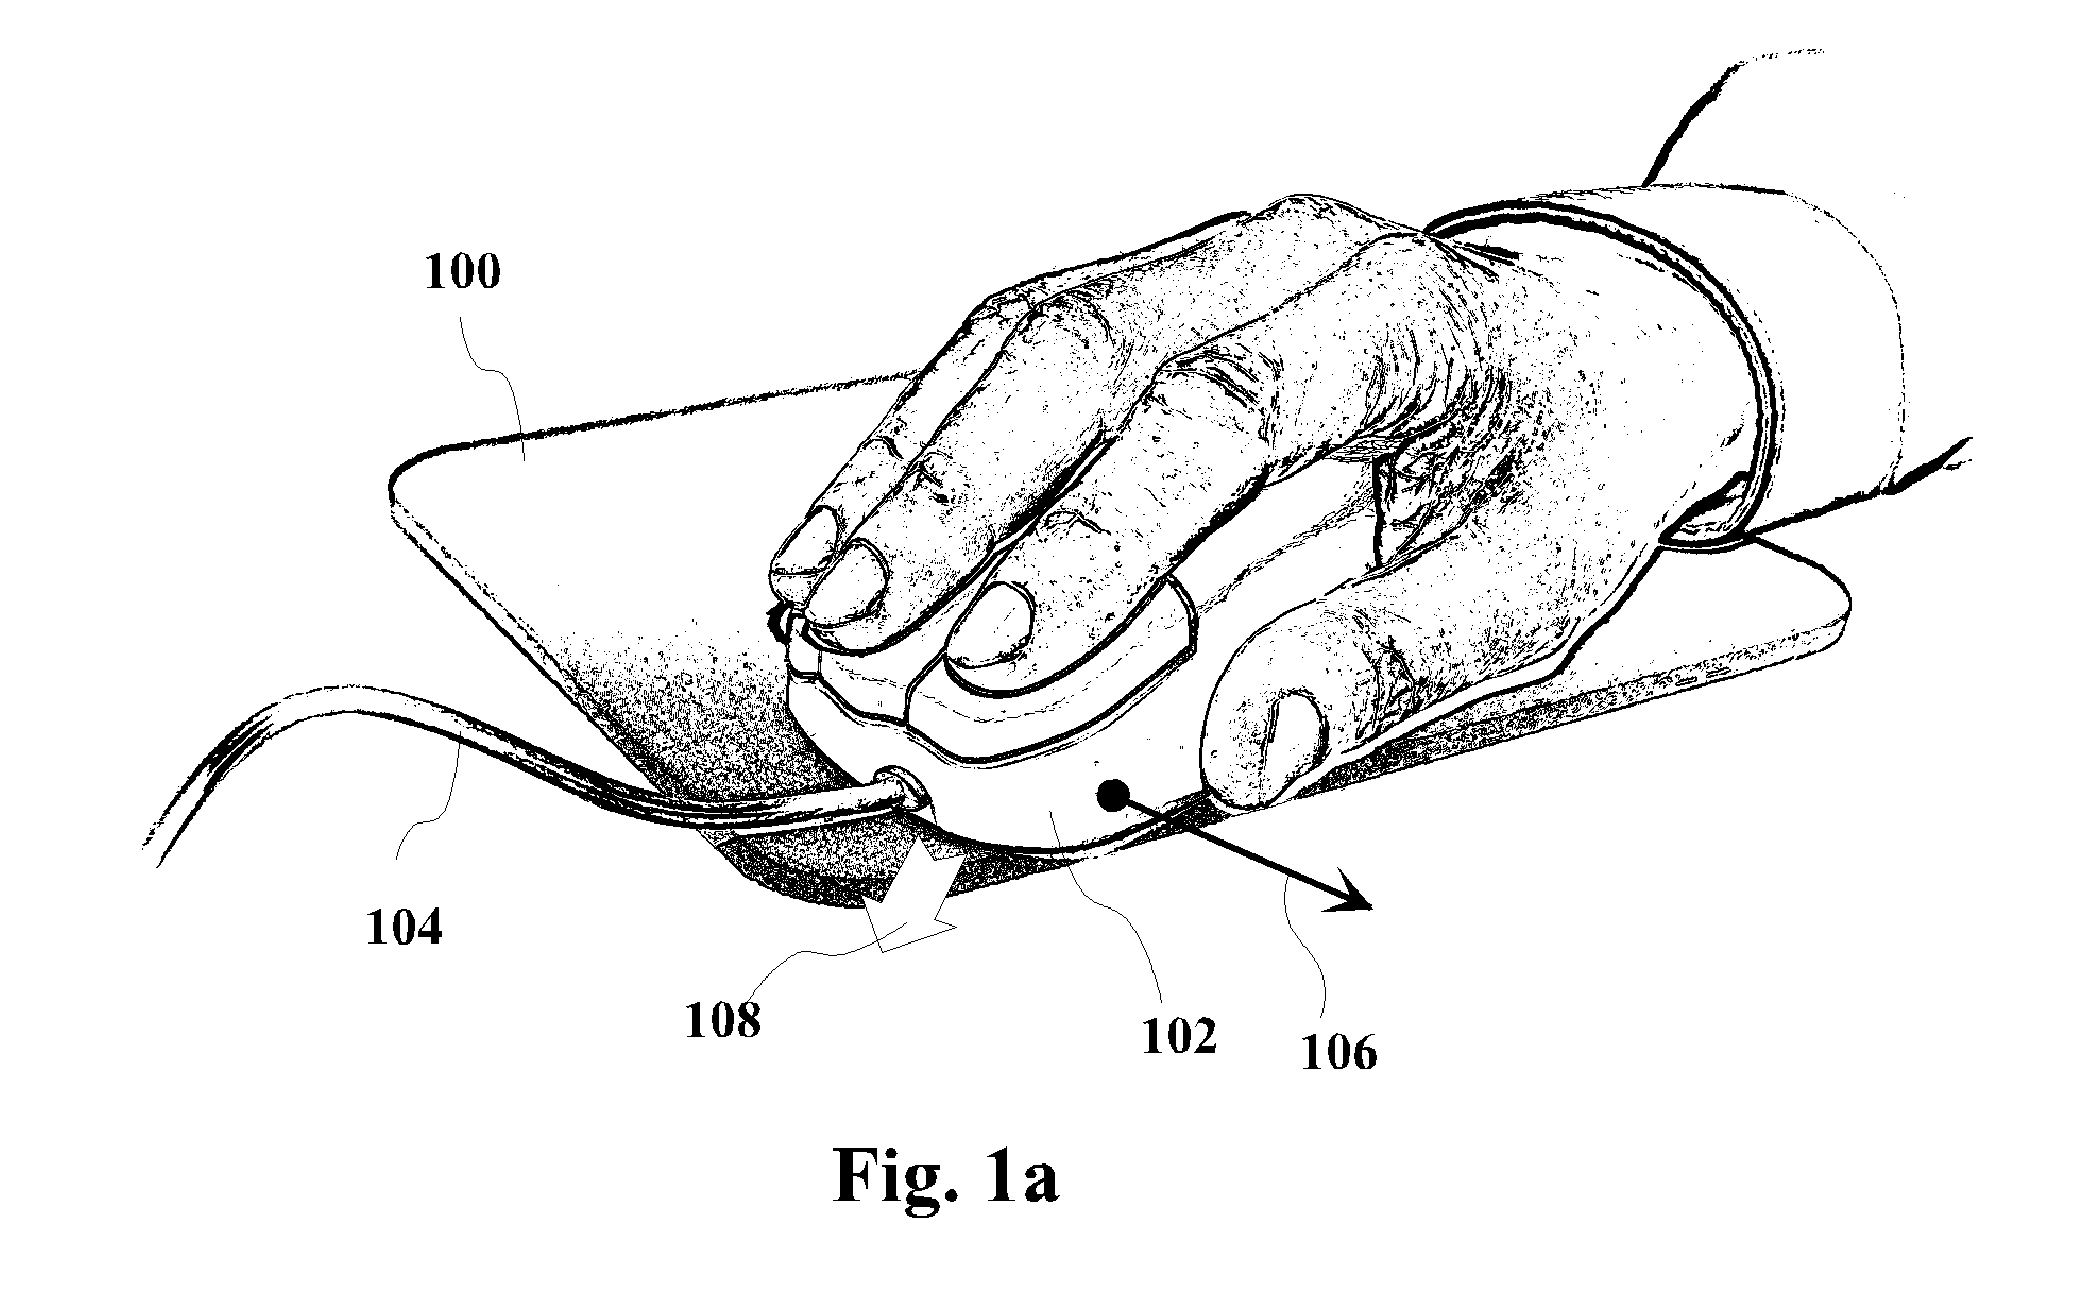 Self-propelled haptic mouse system